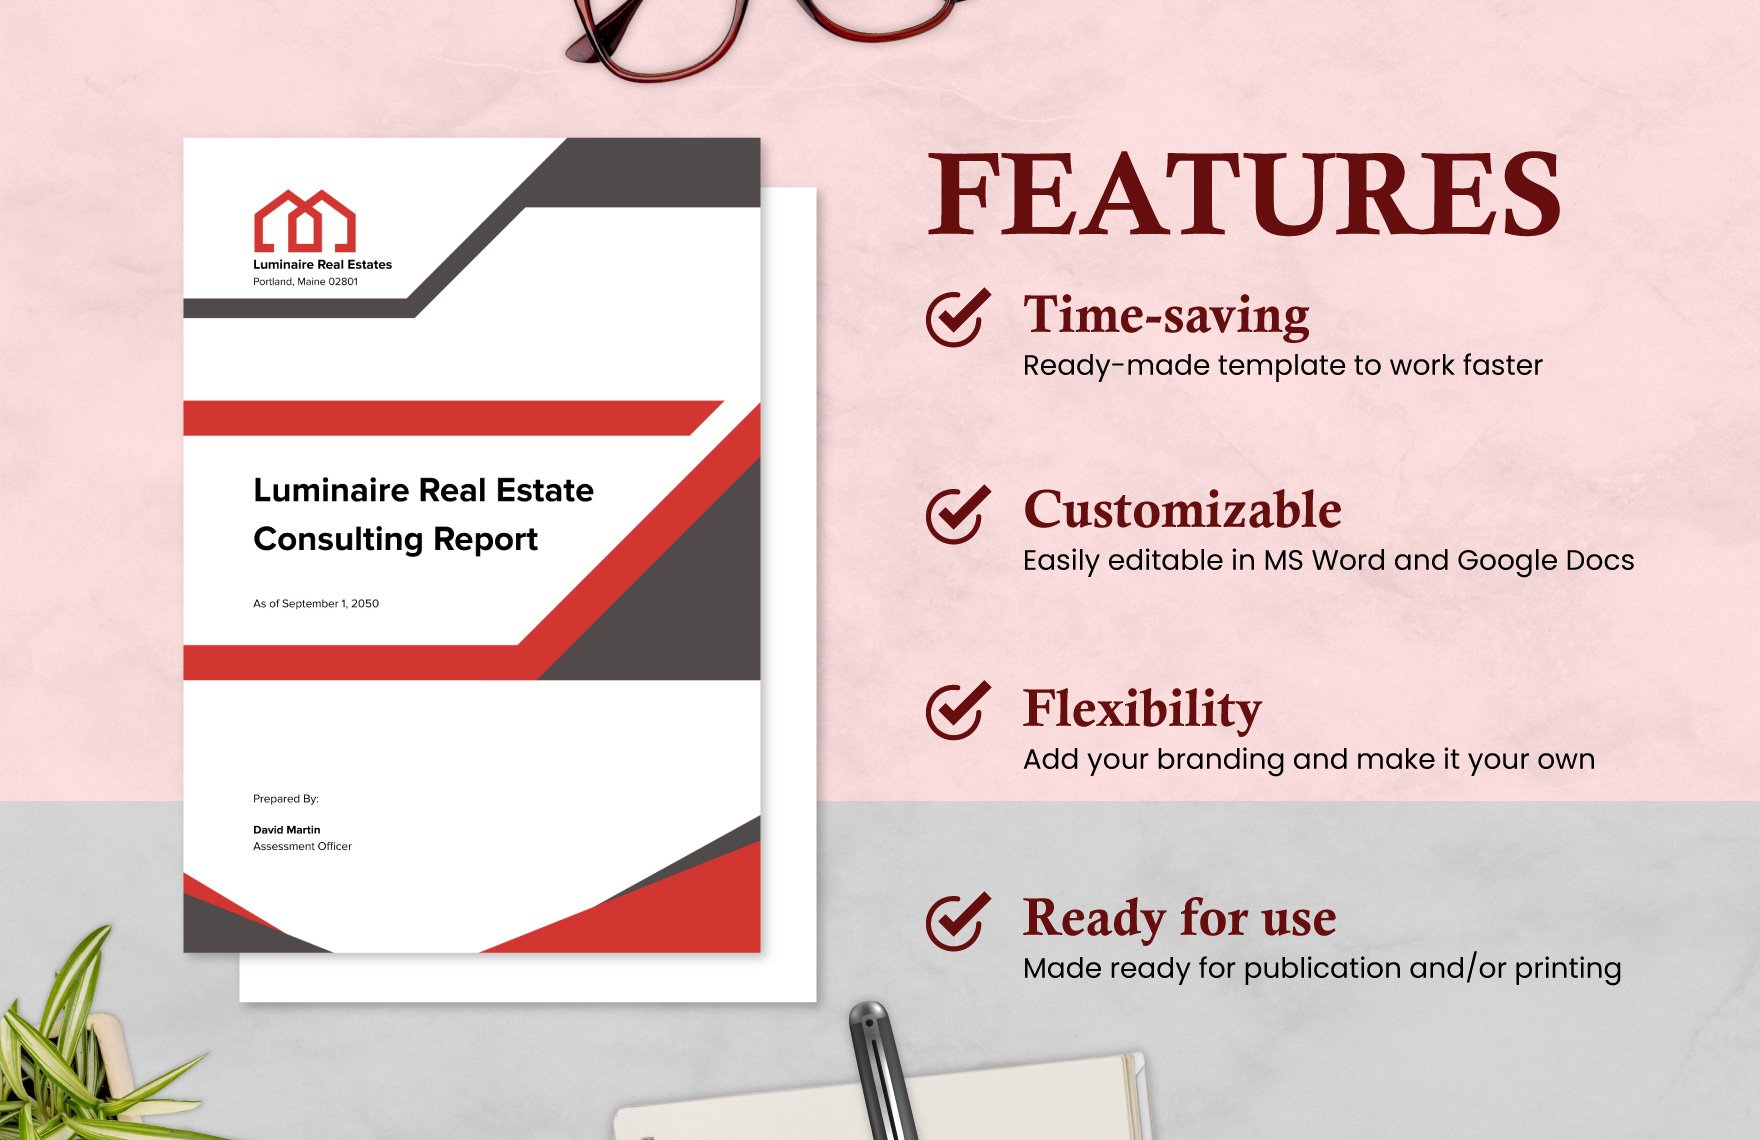 Sample Real Estate Consulting Report Template